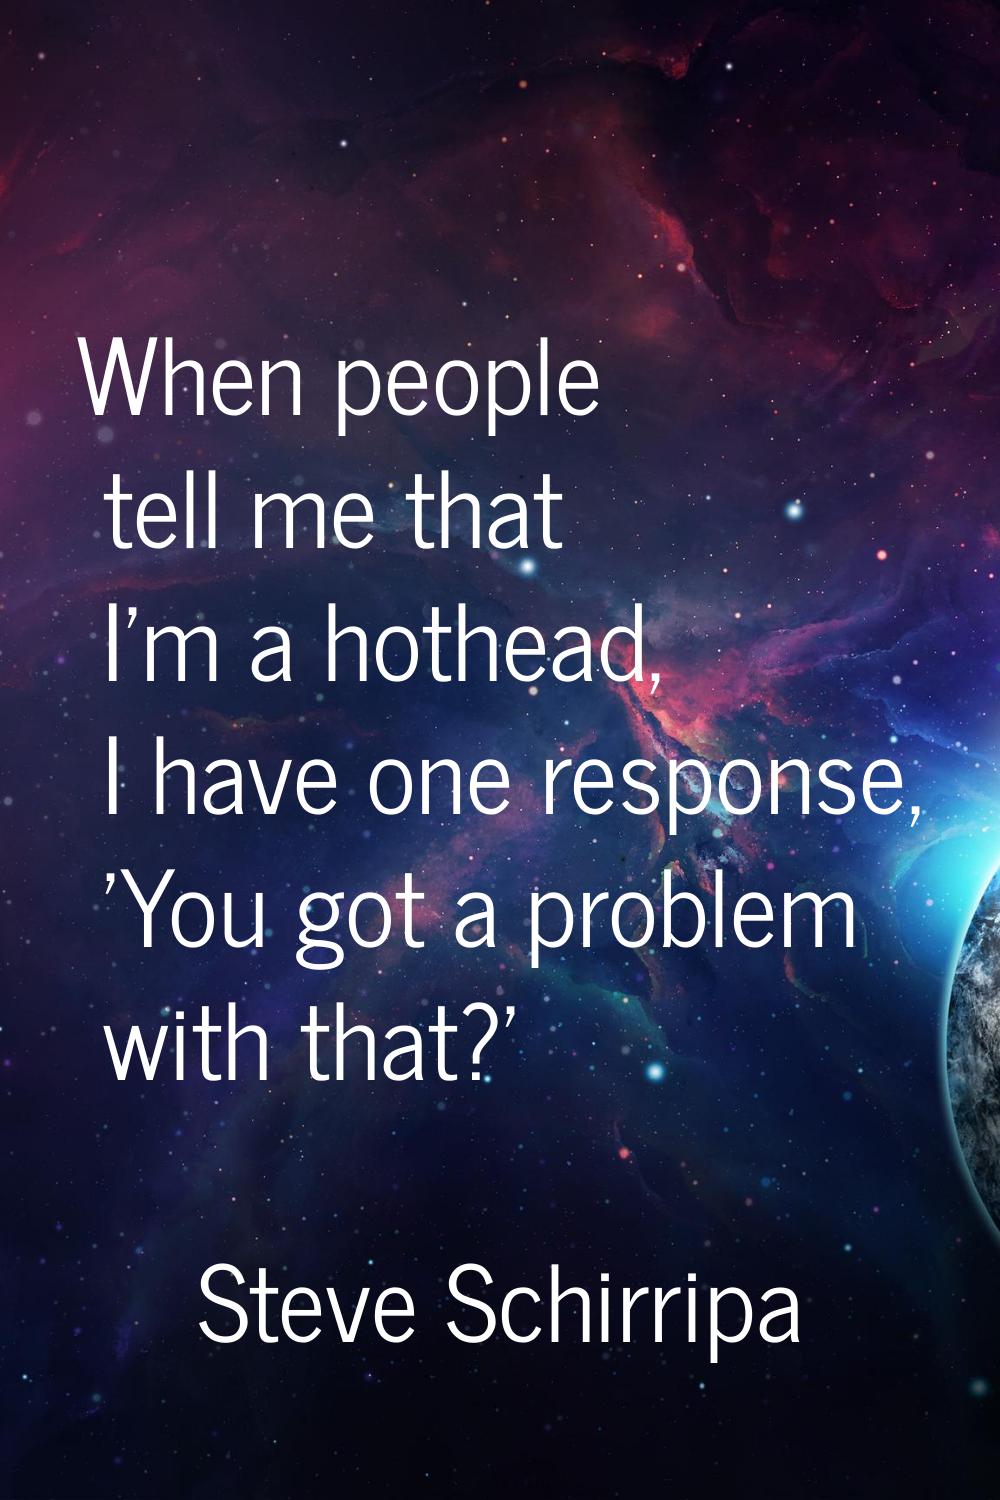 When people tell me that I'm a hothead, I have one response, 'You got a problem with that?'